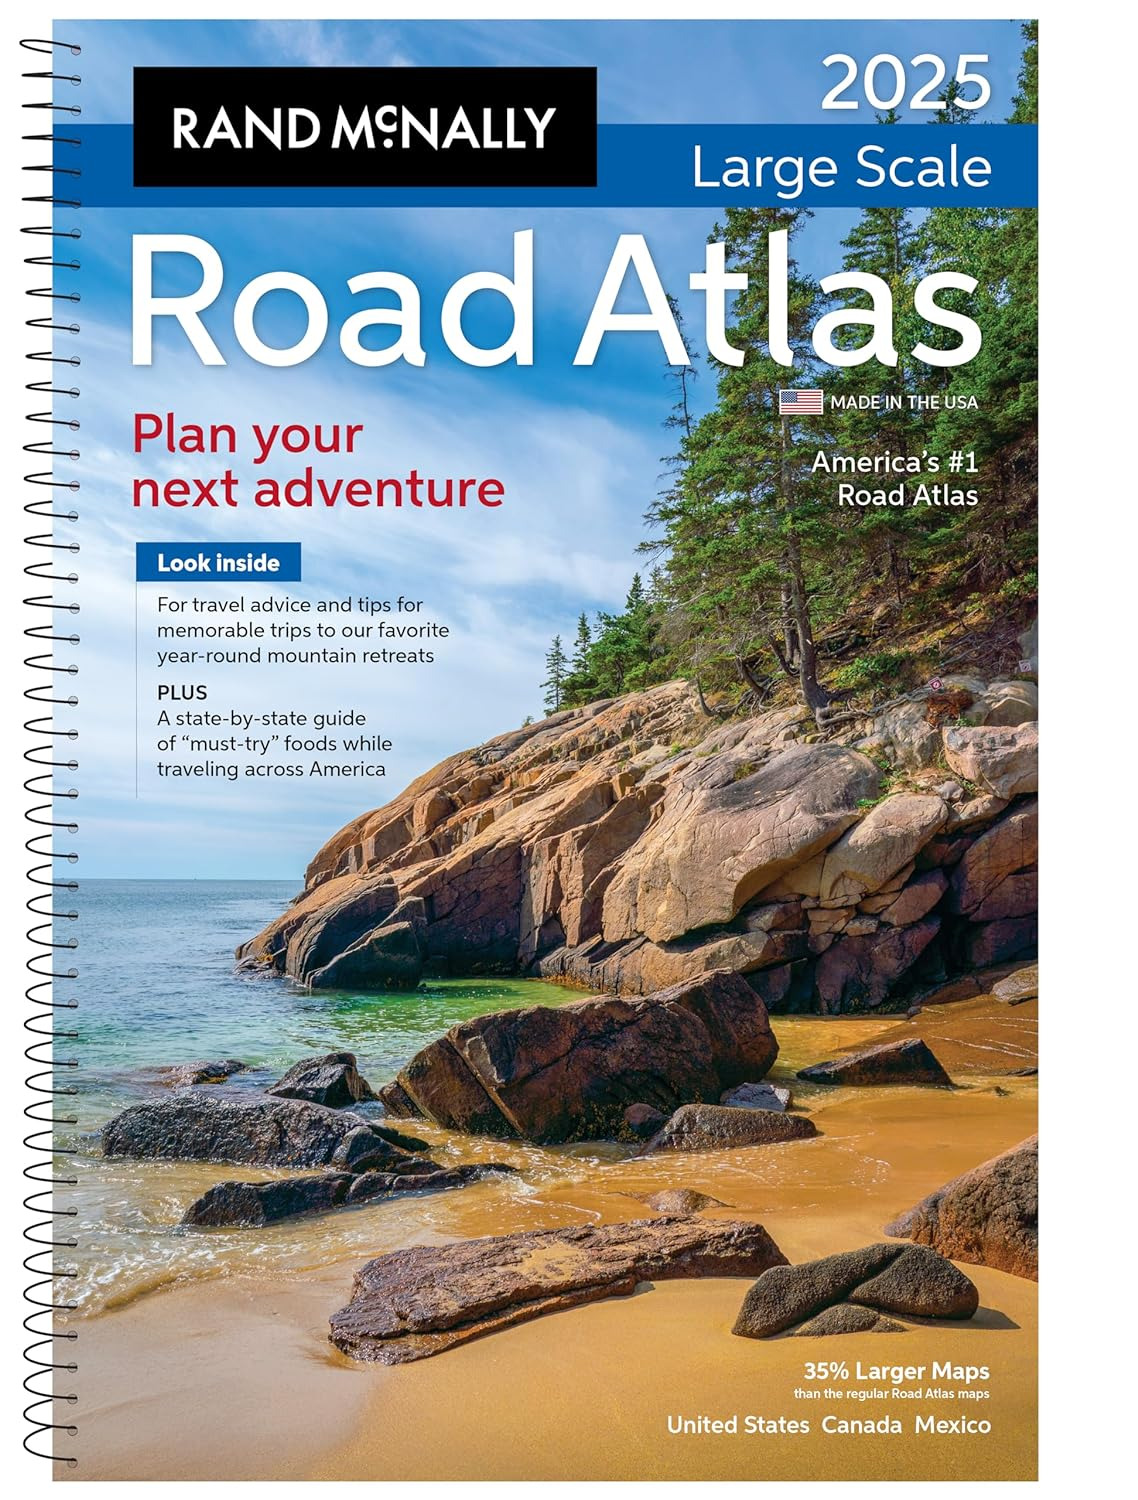 Rand McNally Road Atlas Large Scale 2025: USA, Canada, Mexico (Spiral Bound)